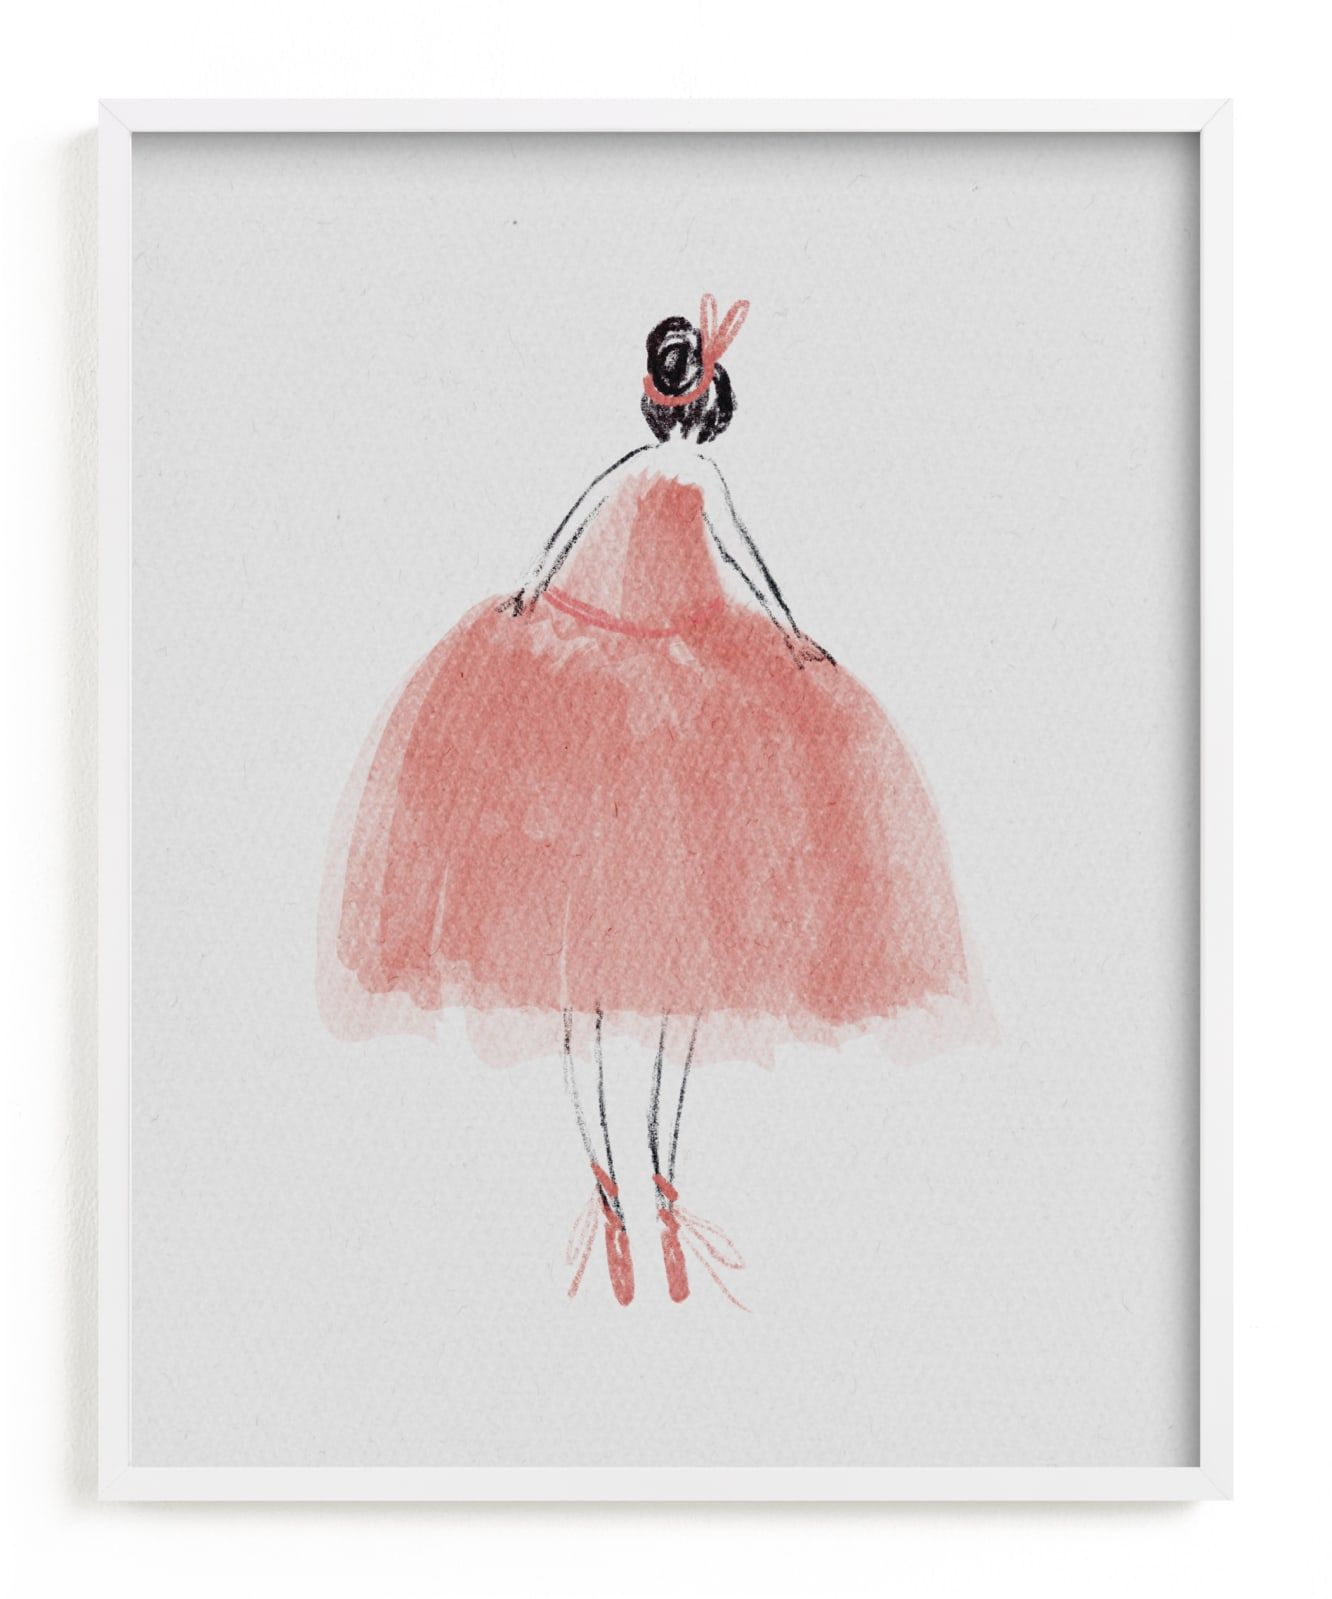 "Painted Ballerina" - Painting Limited Edition Art Print by Grae. | Minted